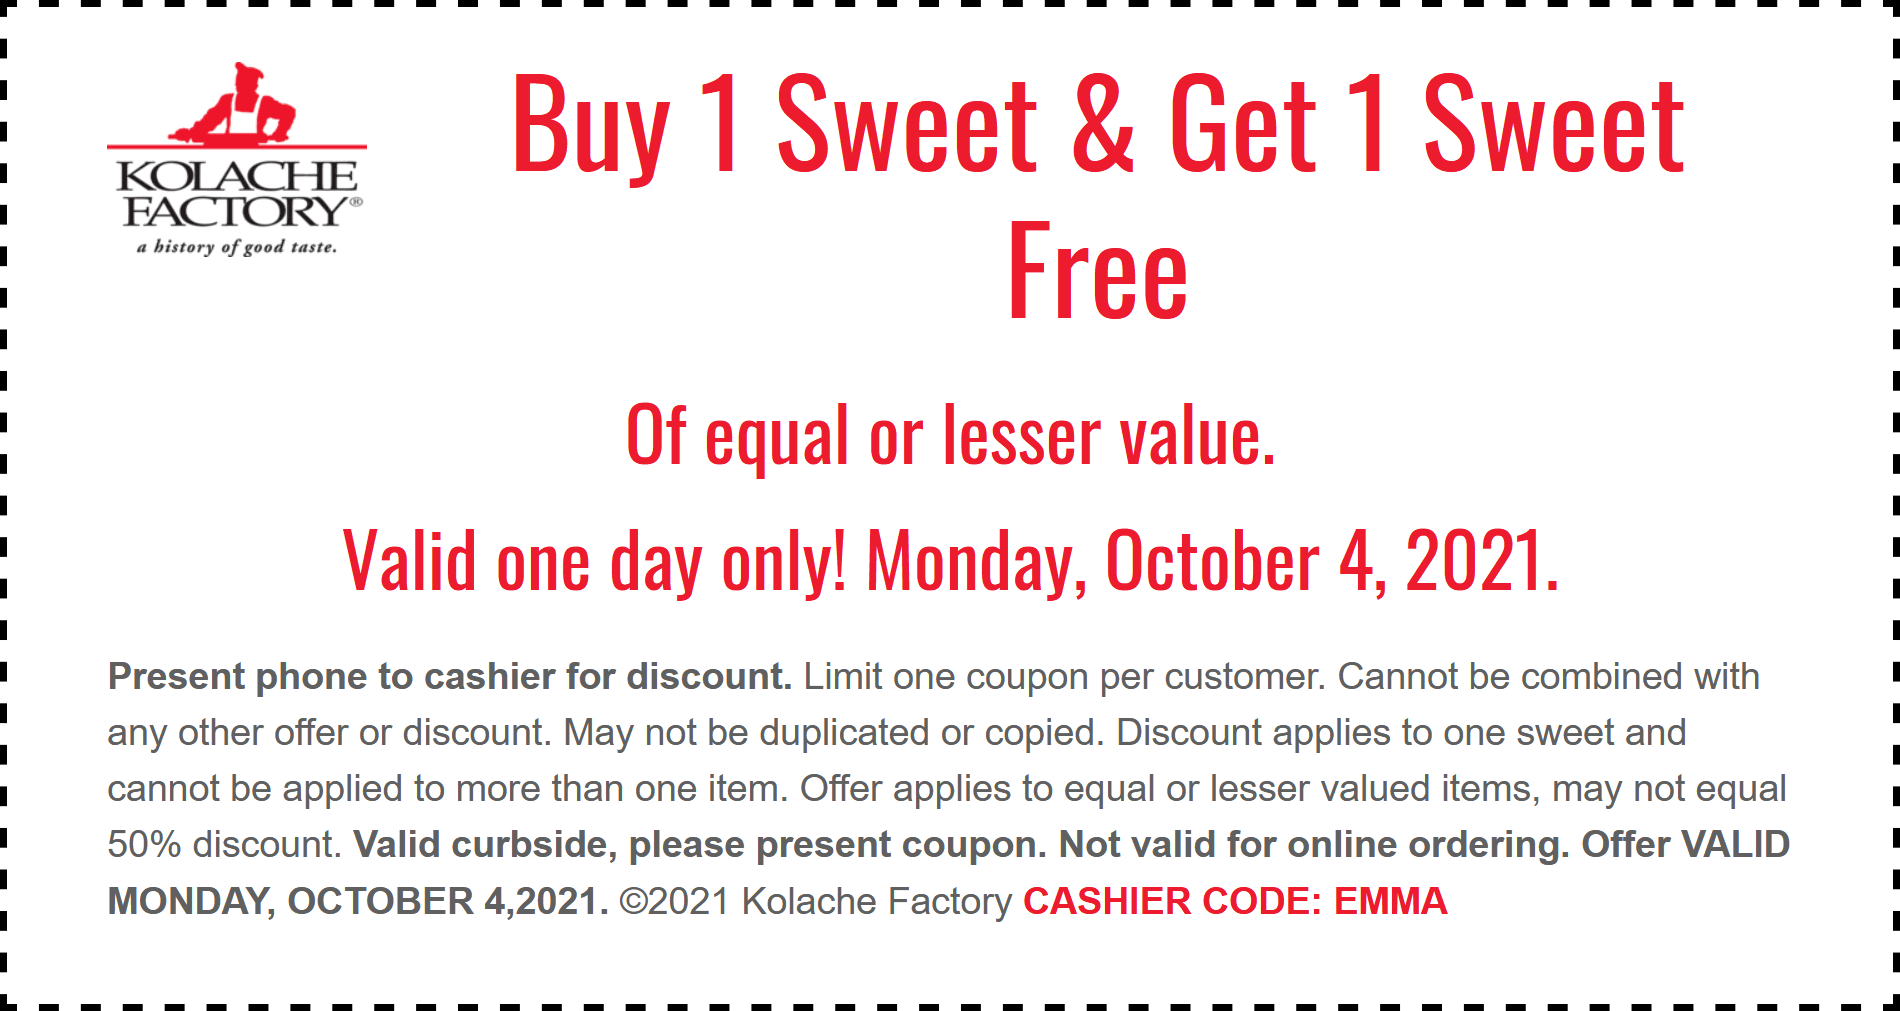 Kolache Factory stores Coupon  Second sweet free today at Kolache Factory #kolachefactory 